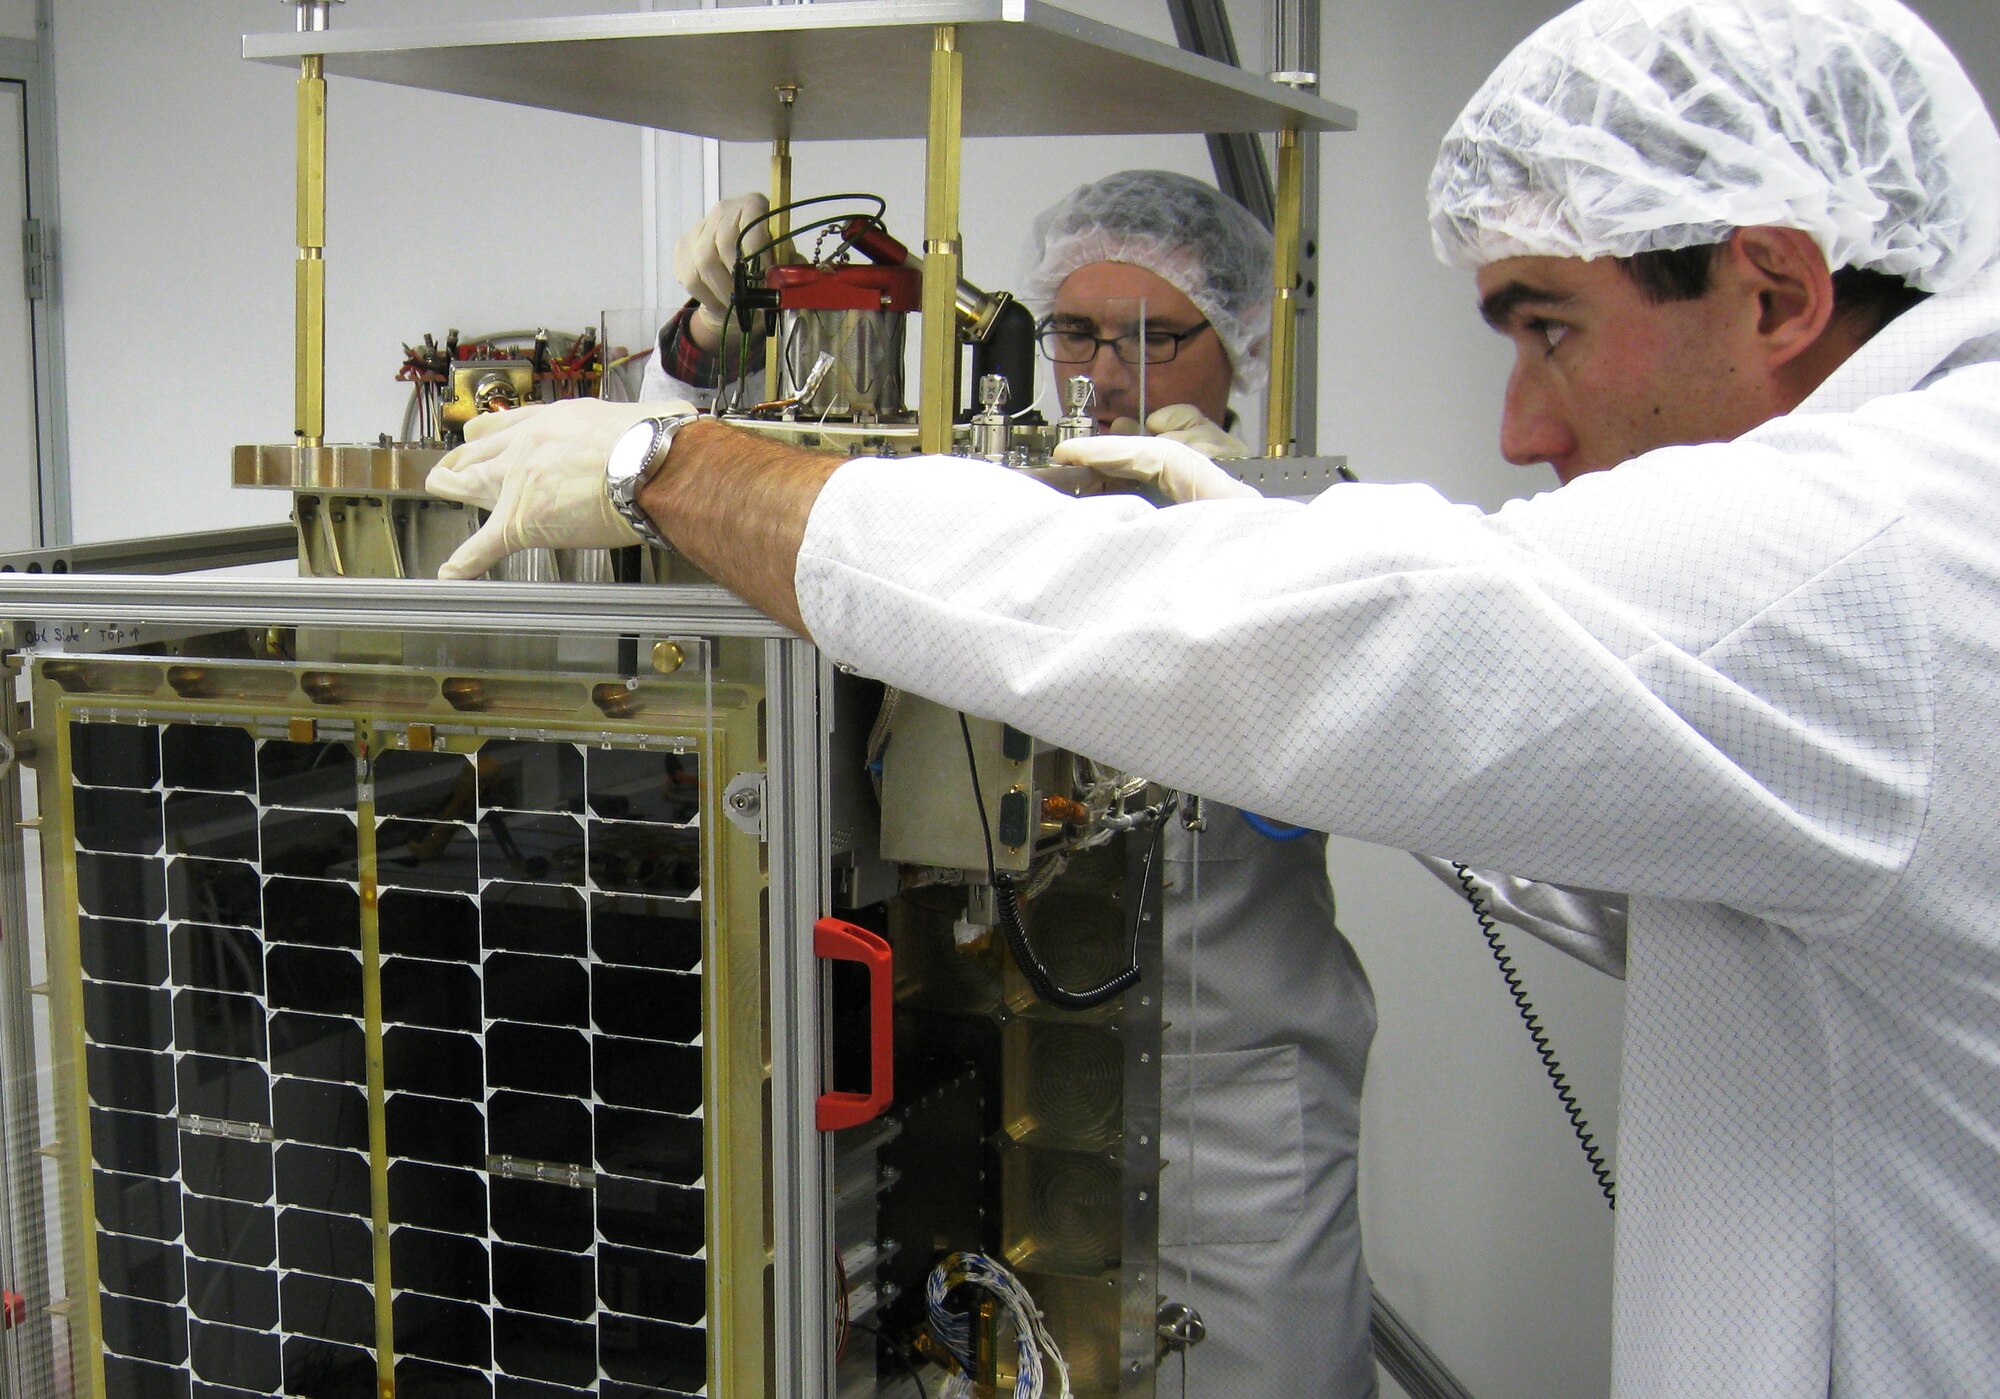 Pat O'Grady from InStar Engineering and Eric Ehrbar from Busek Inc. confirm FalconSAT-5's fit check with its main payload, the Space Plasma Characterization Source, at the U.S. Air Force Academy in Colorado Springs, Colo., Sept. 28, 2009. FalconSAT-5 is an $11-million program sponsored by the Air Force Research Laboratory, headquartered at Wright-Patterson Air Force Base, Ohio. (U.S. Air Force photo/Maj. Steve Hart)